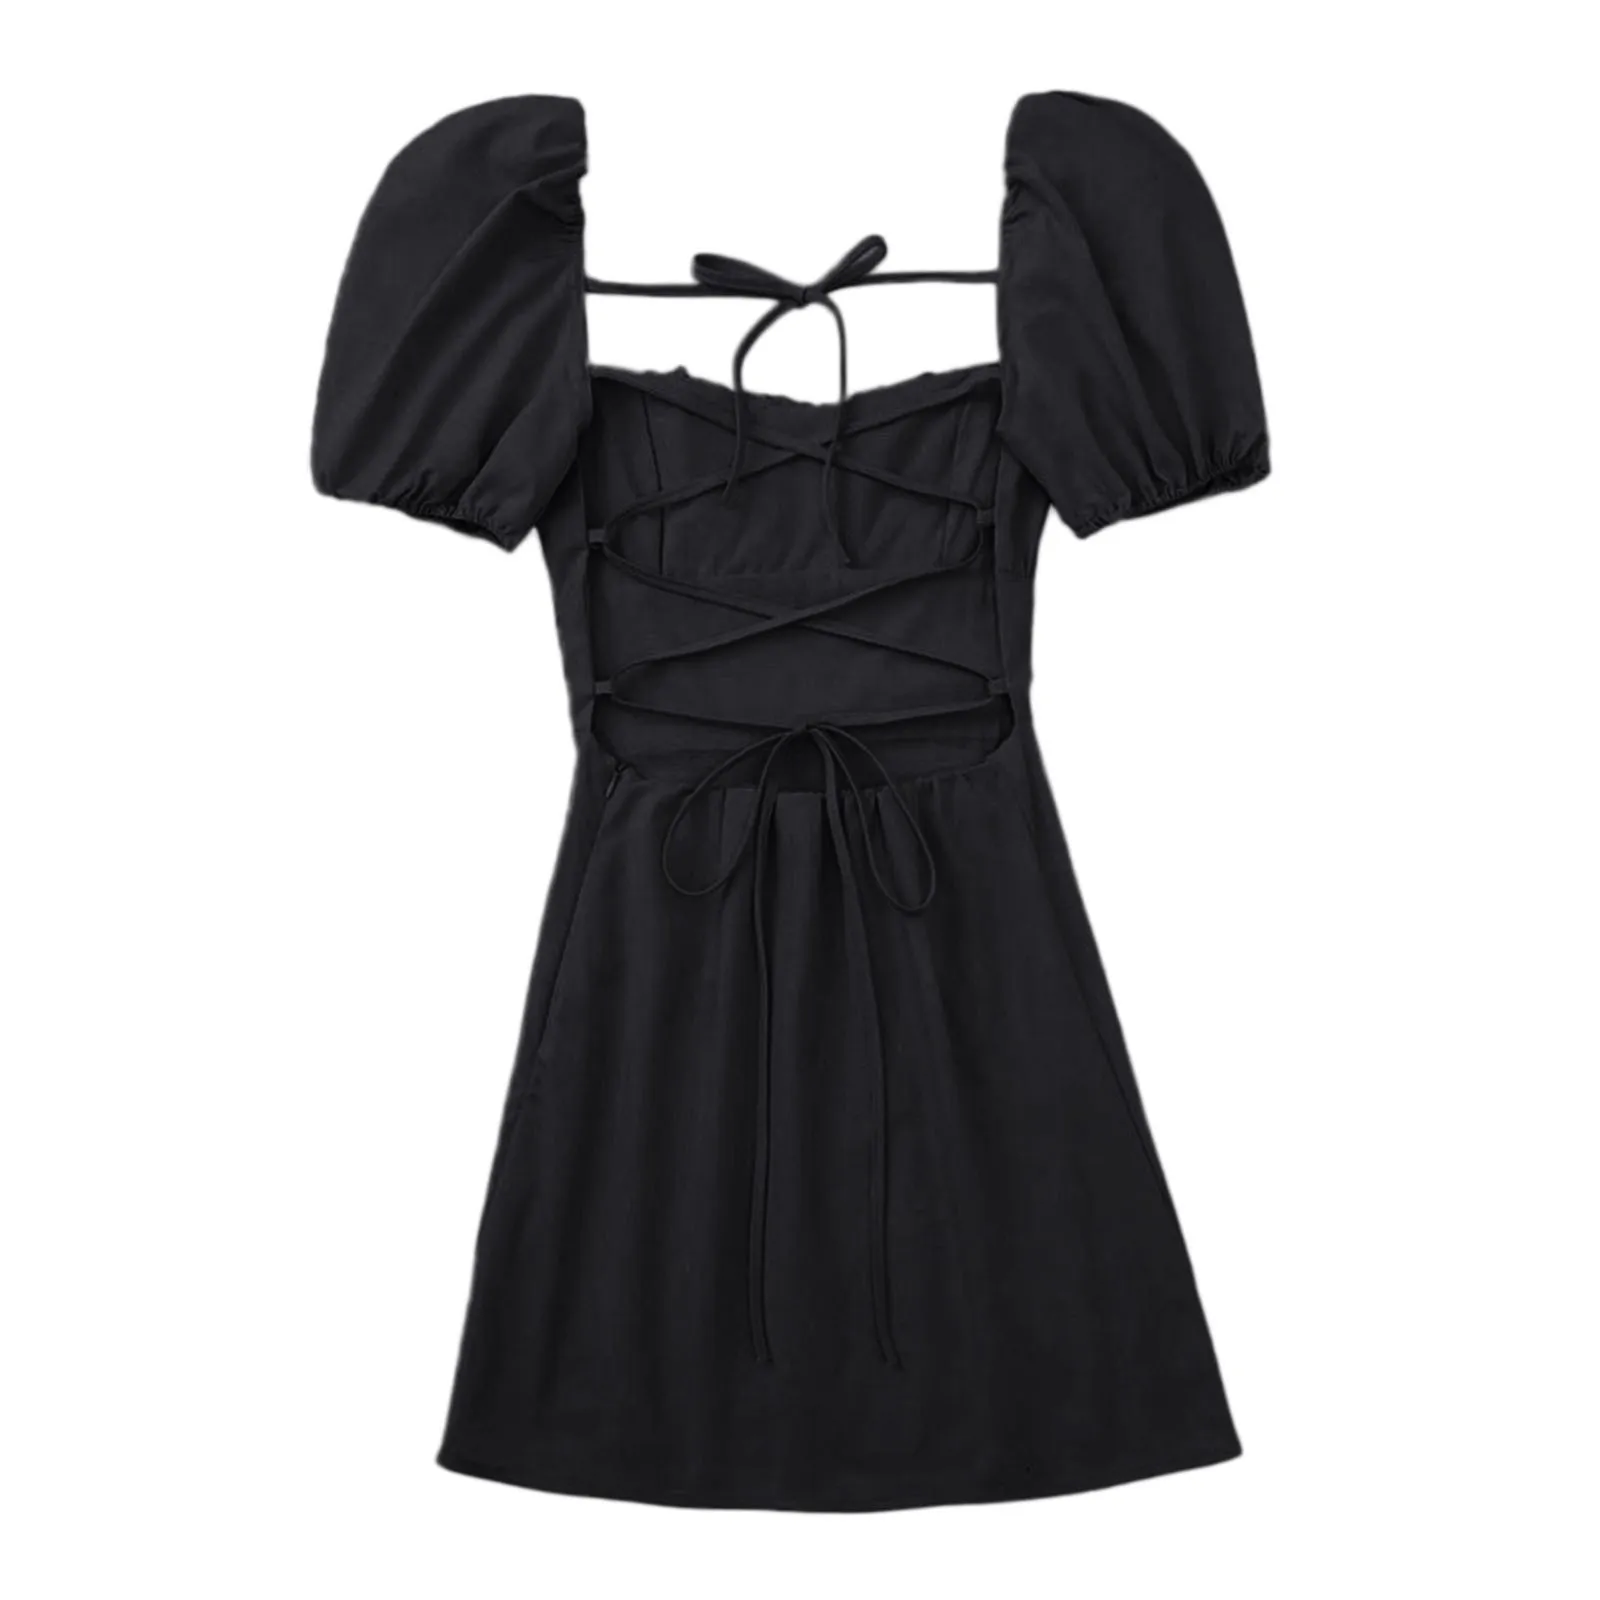 

Women Puff Sleeve Dress Square Collar Criss Cross Lace Up Backless Sexy Mini Dresses Solid Color Summer Party Slim Fit Sundress